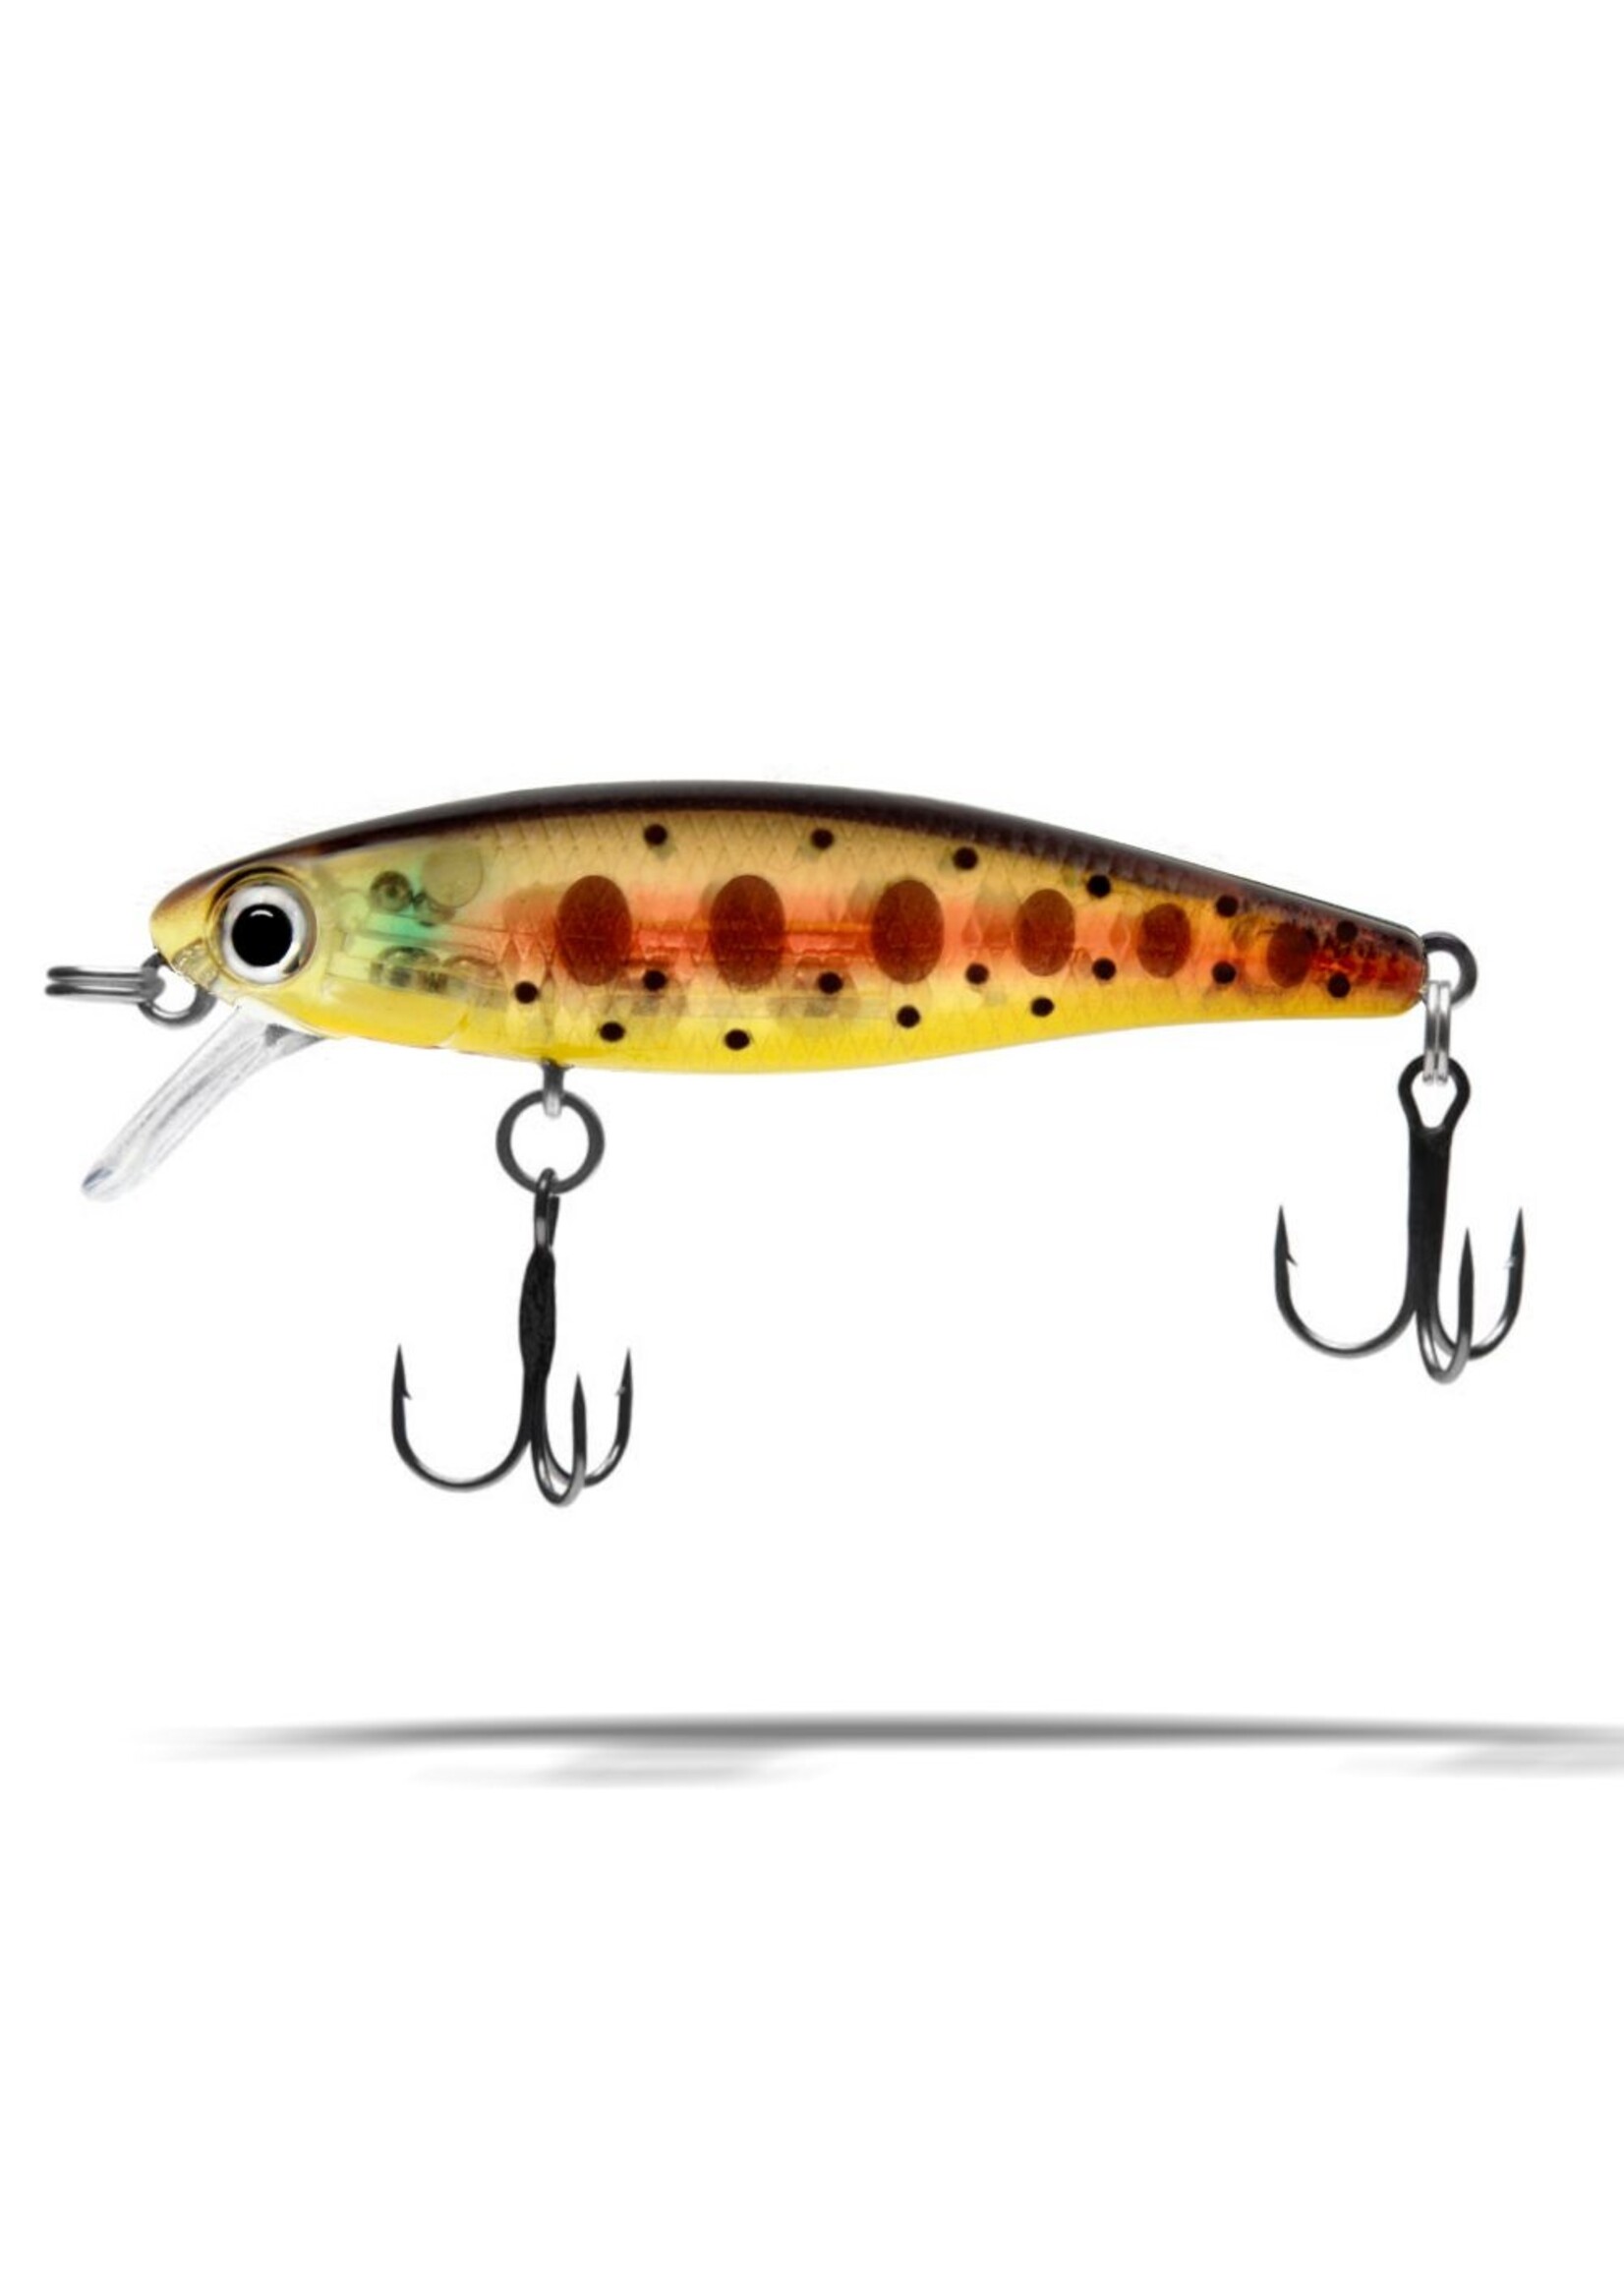 Trout Attack, Trout Attack by Dynamic Lures!, By Dynamic Lures